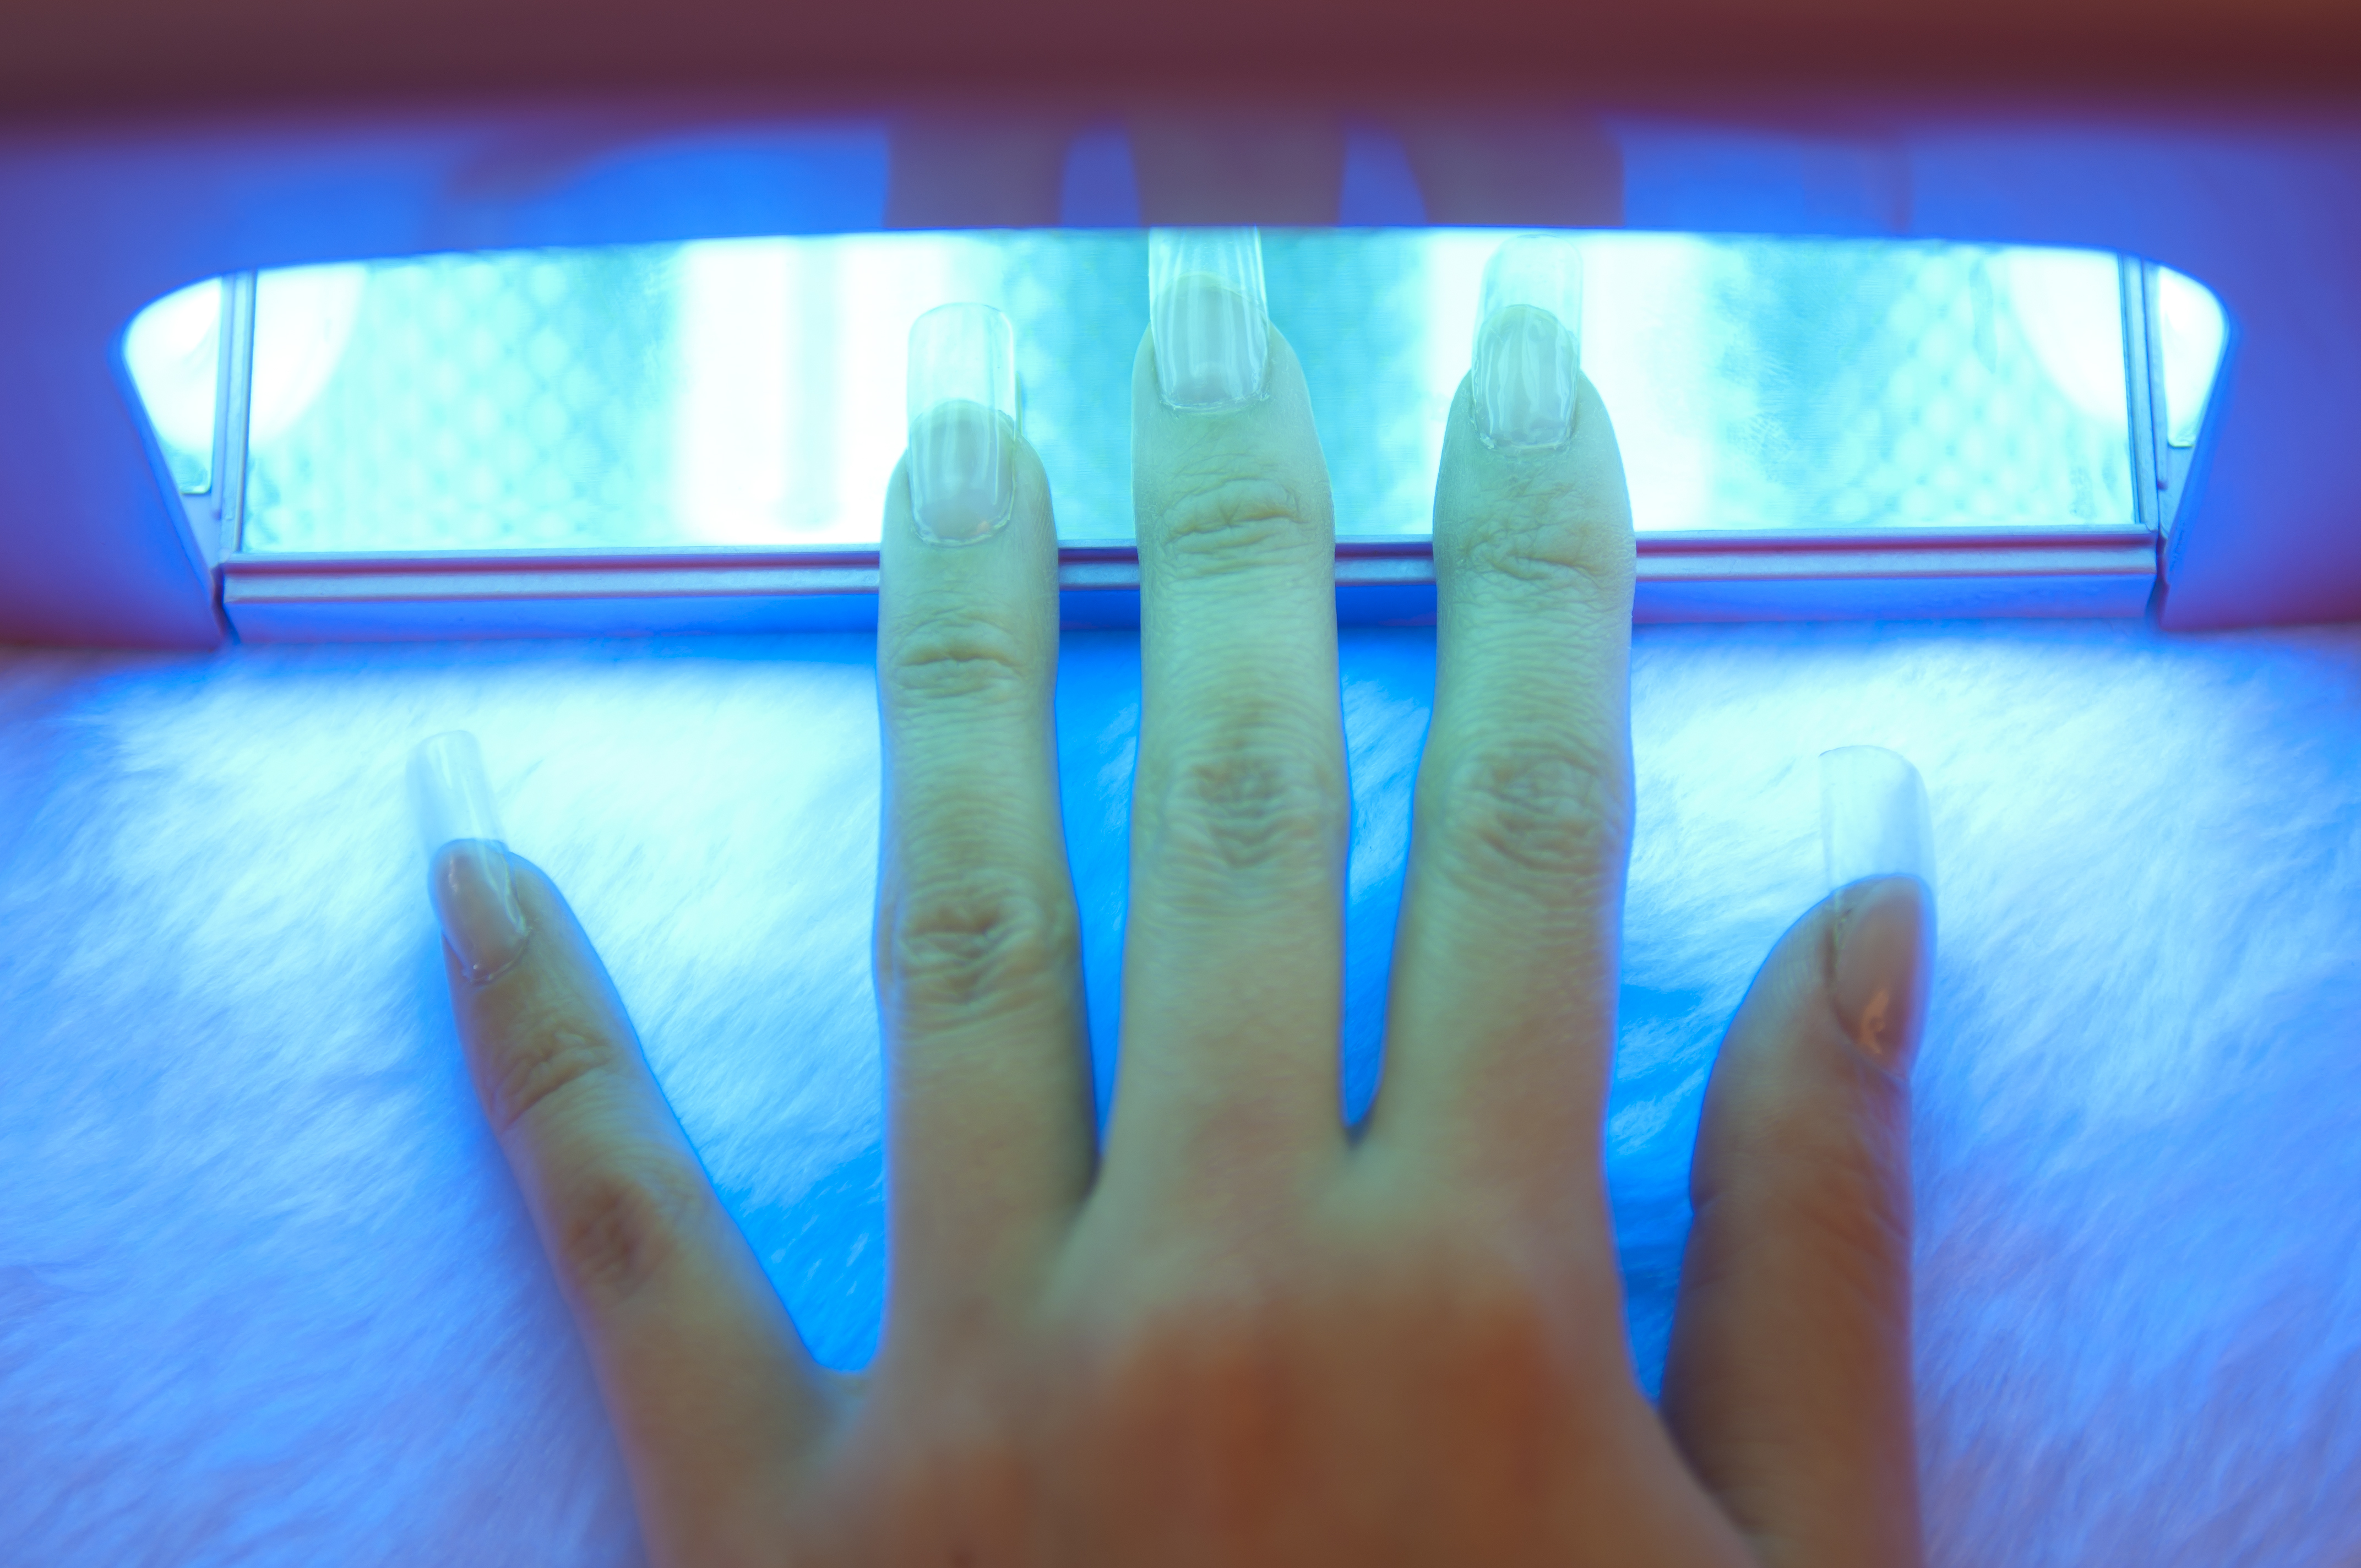 UV-emitting nail polish dryers damage DNA and cause cell mutations